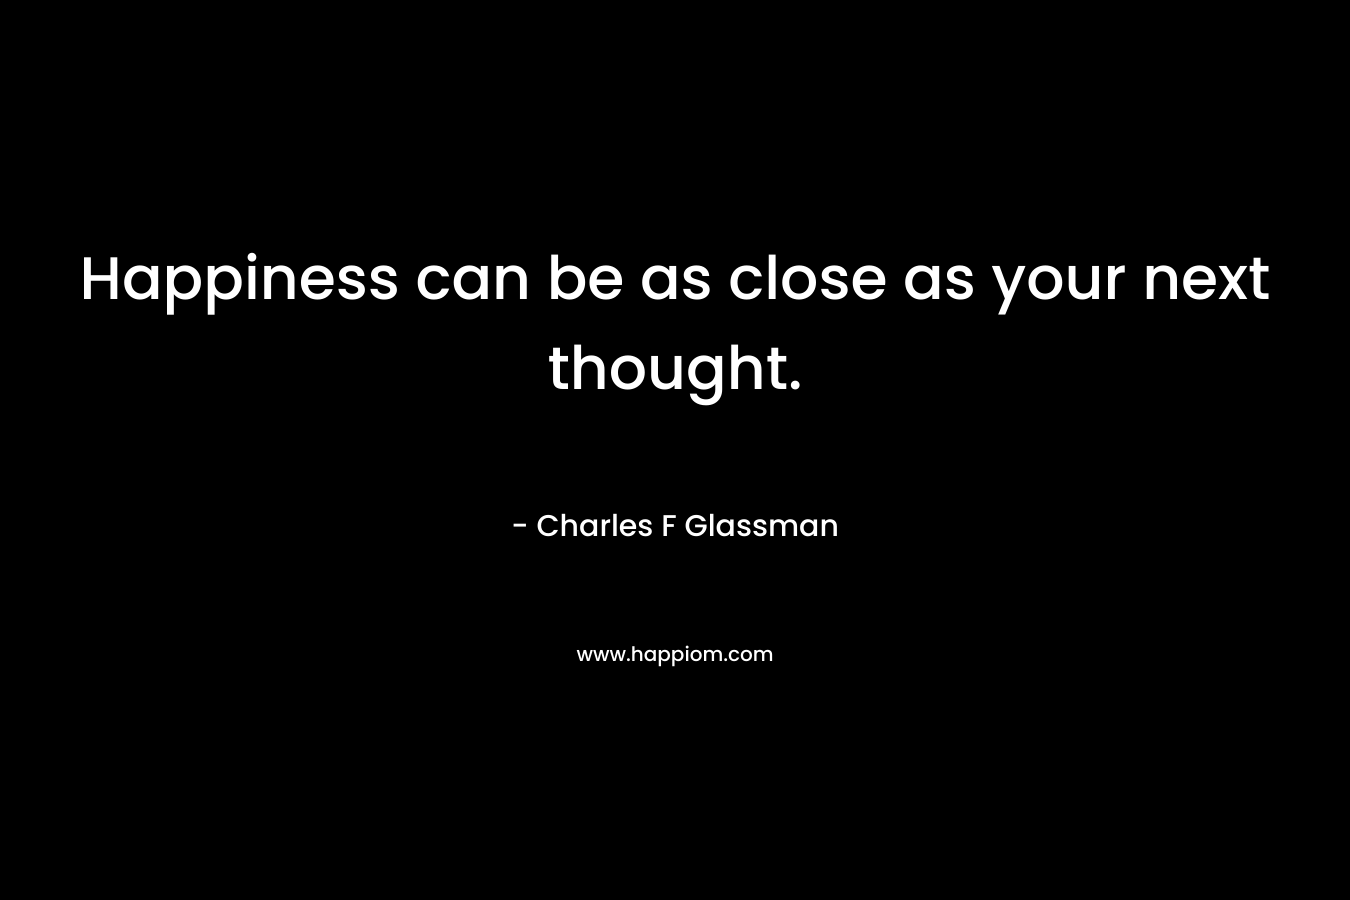 Happiness can be as close as your next thought.